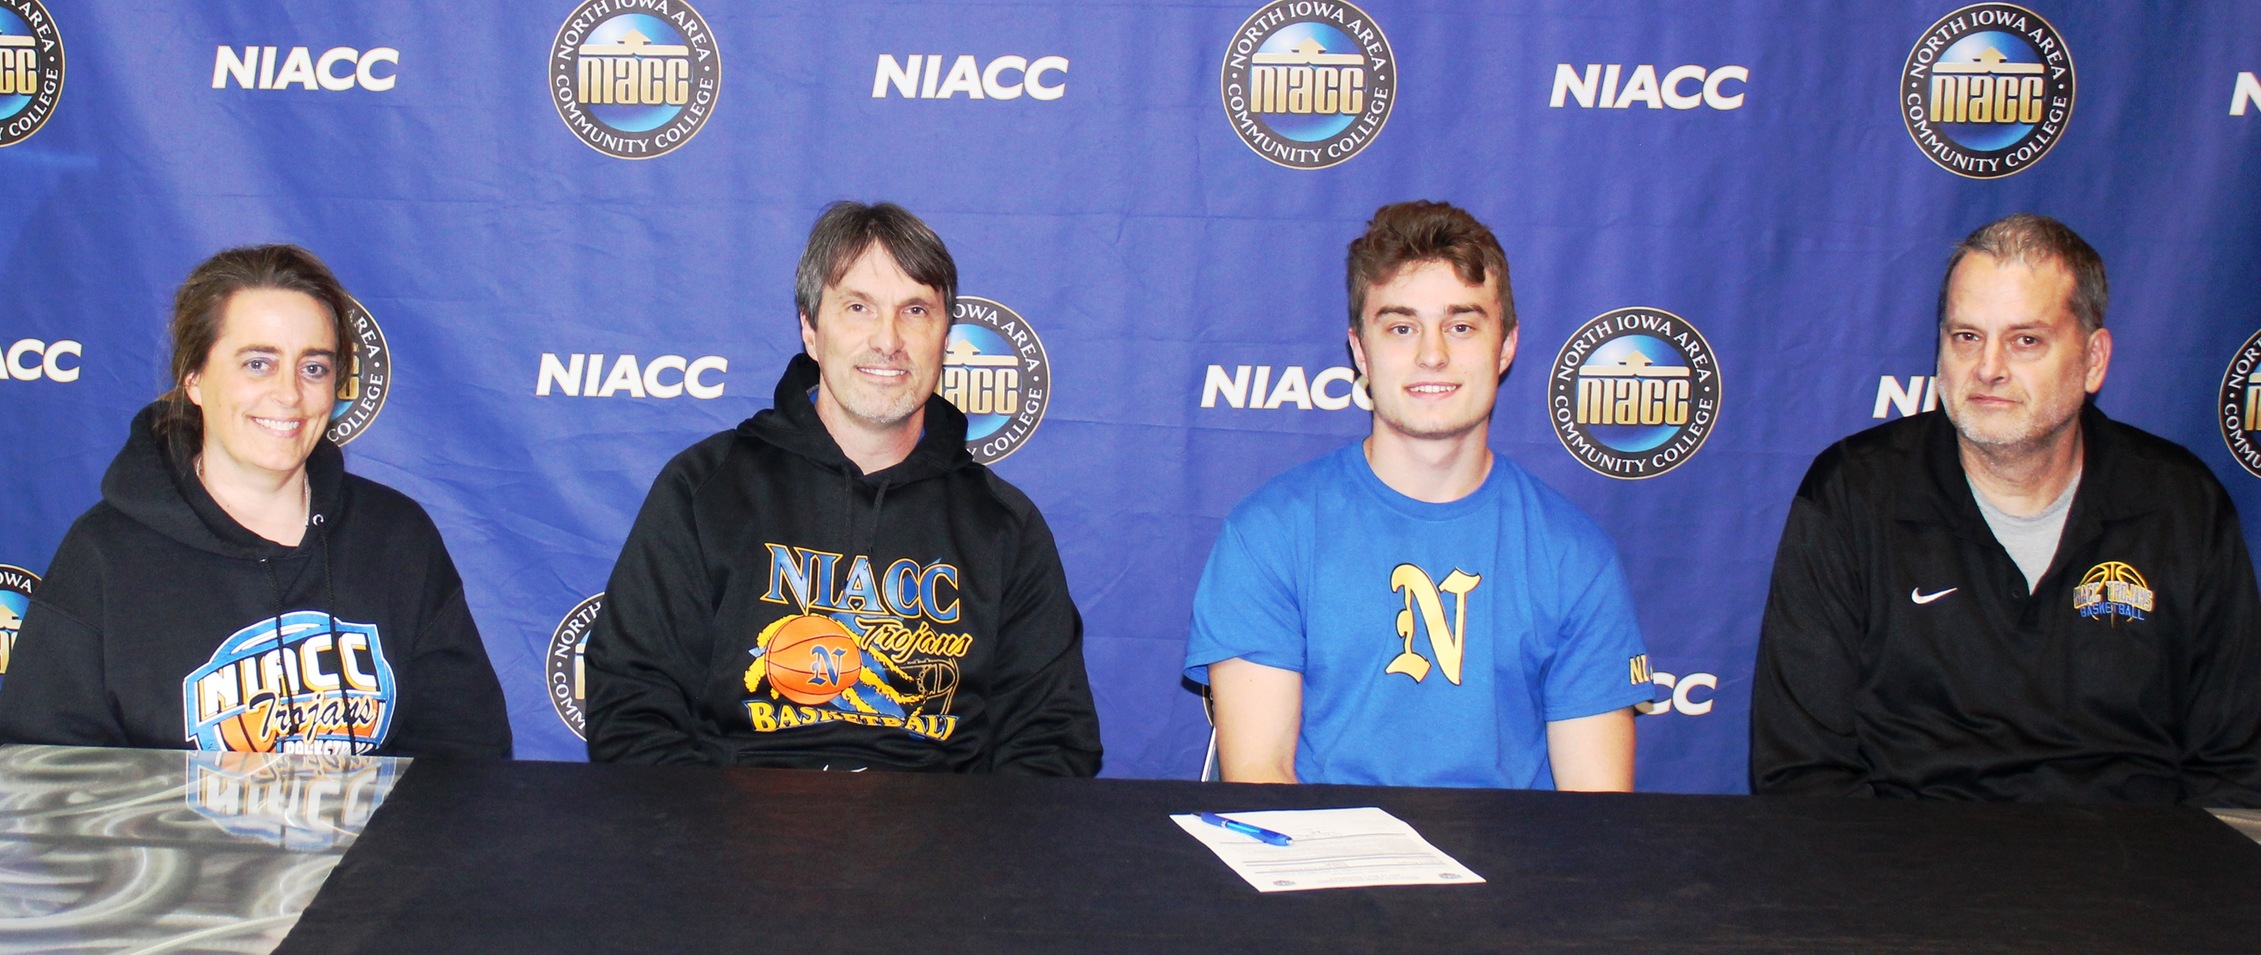 Mac Skogen signed a national letter of intent to play basketball at NIACC next season.